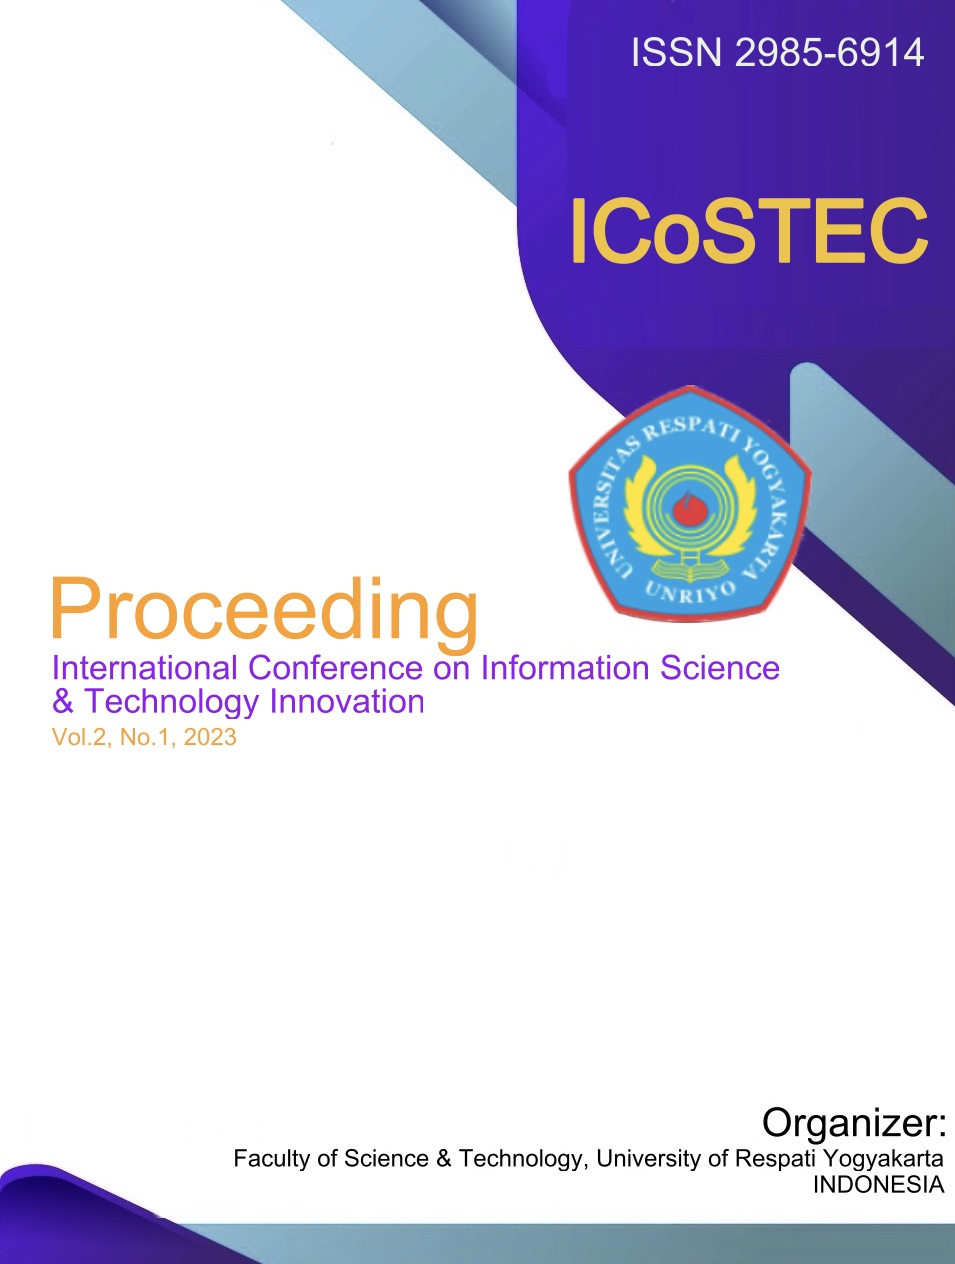 					View Vol. 2 No. 1 (2023): Proceeding of International Conference on Information Science and Technology Innovation (ICoSTEC) 2023
				